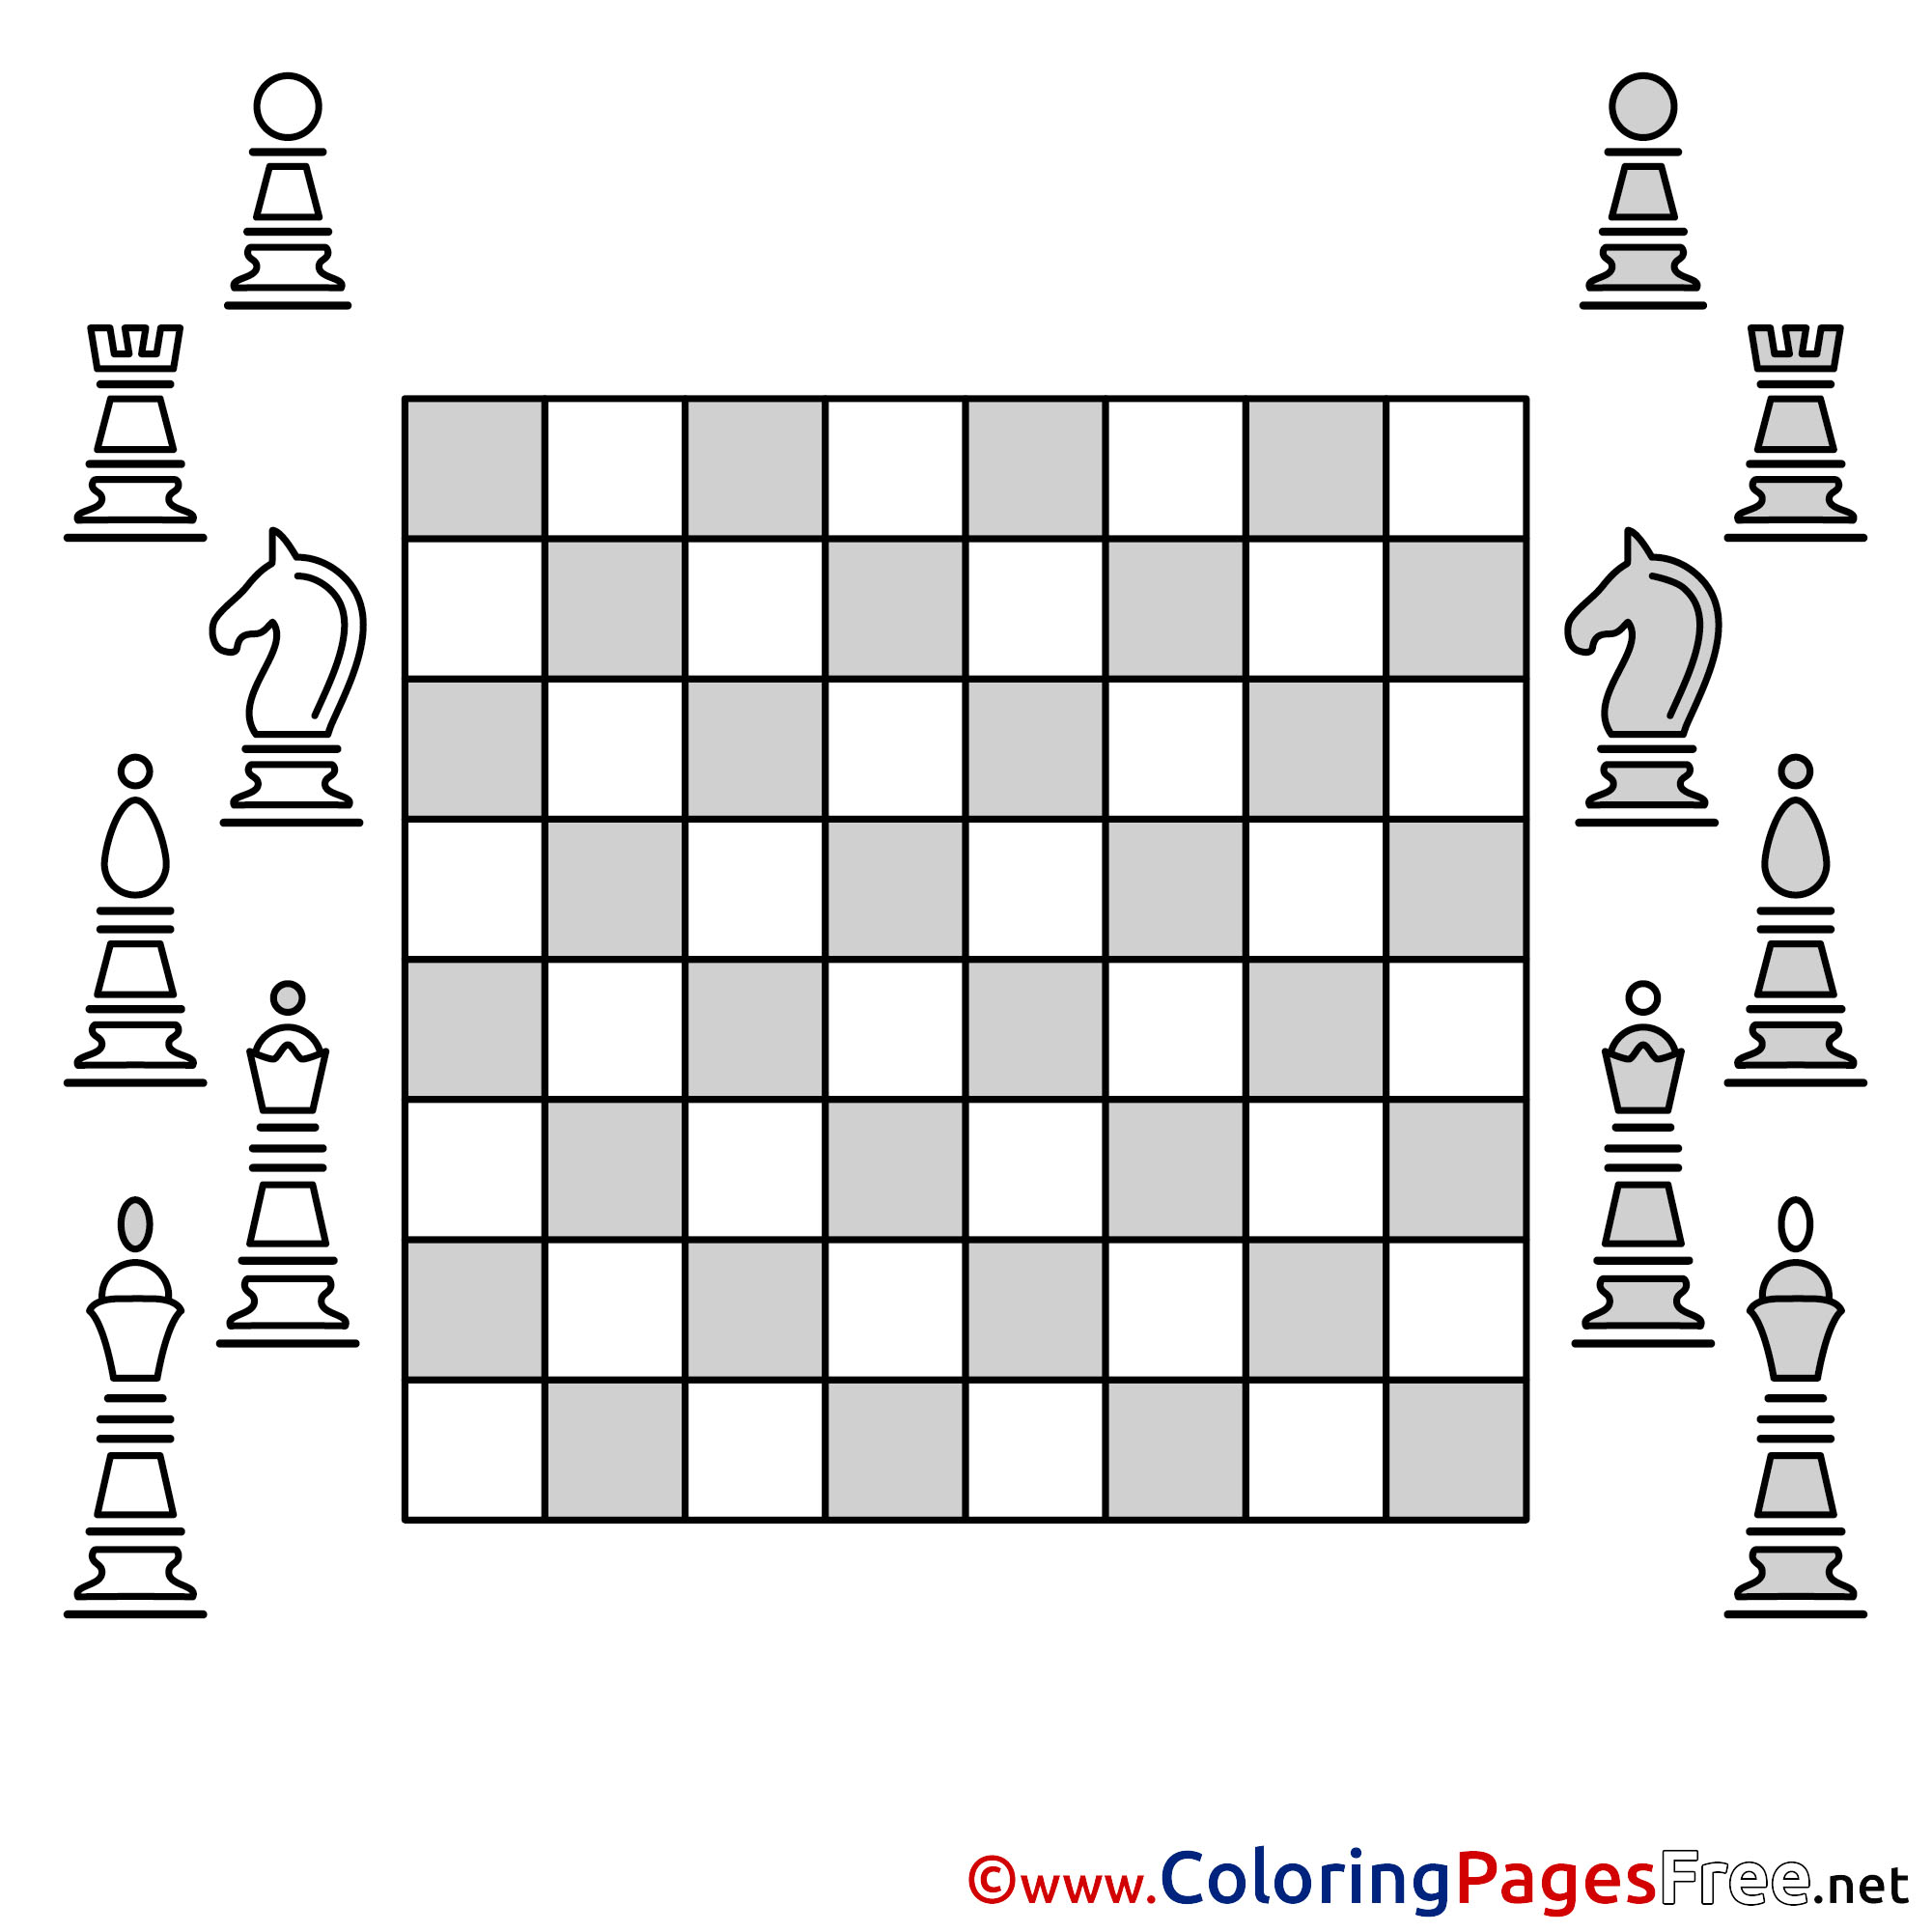 Free chess board colouring page download